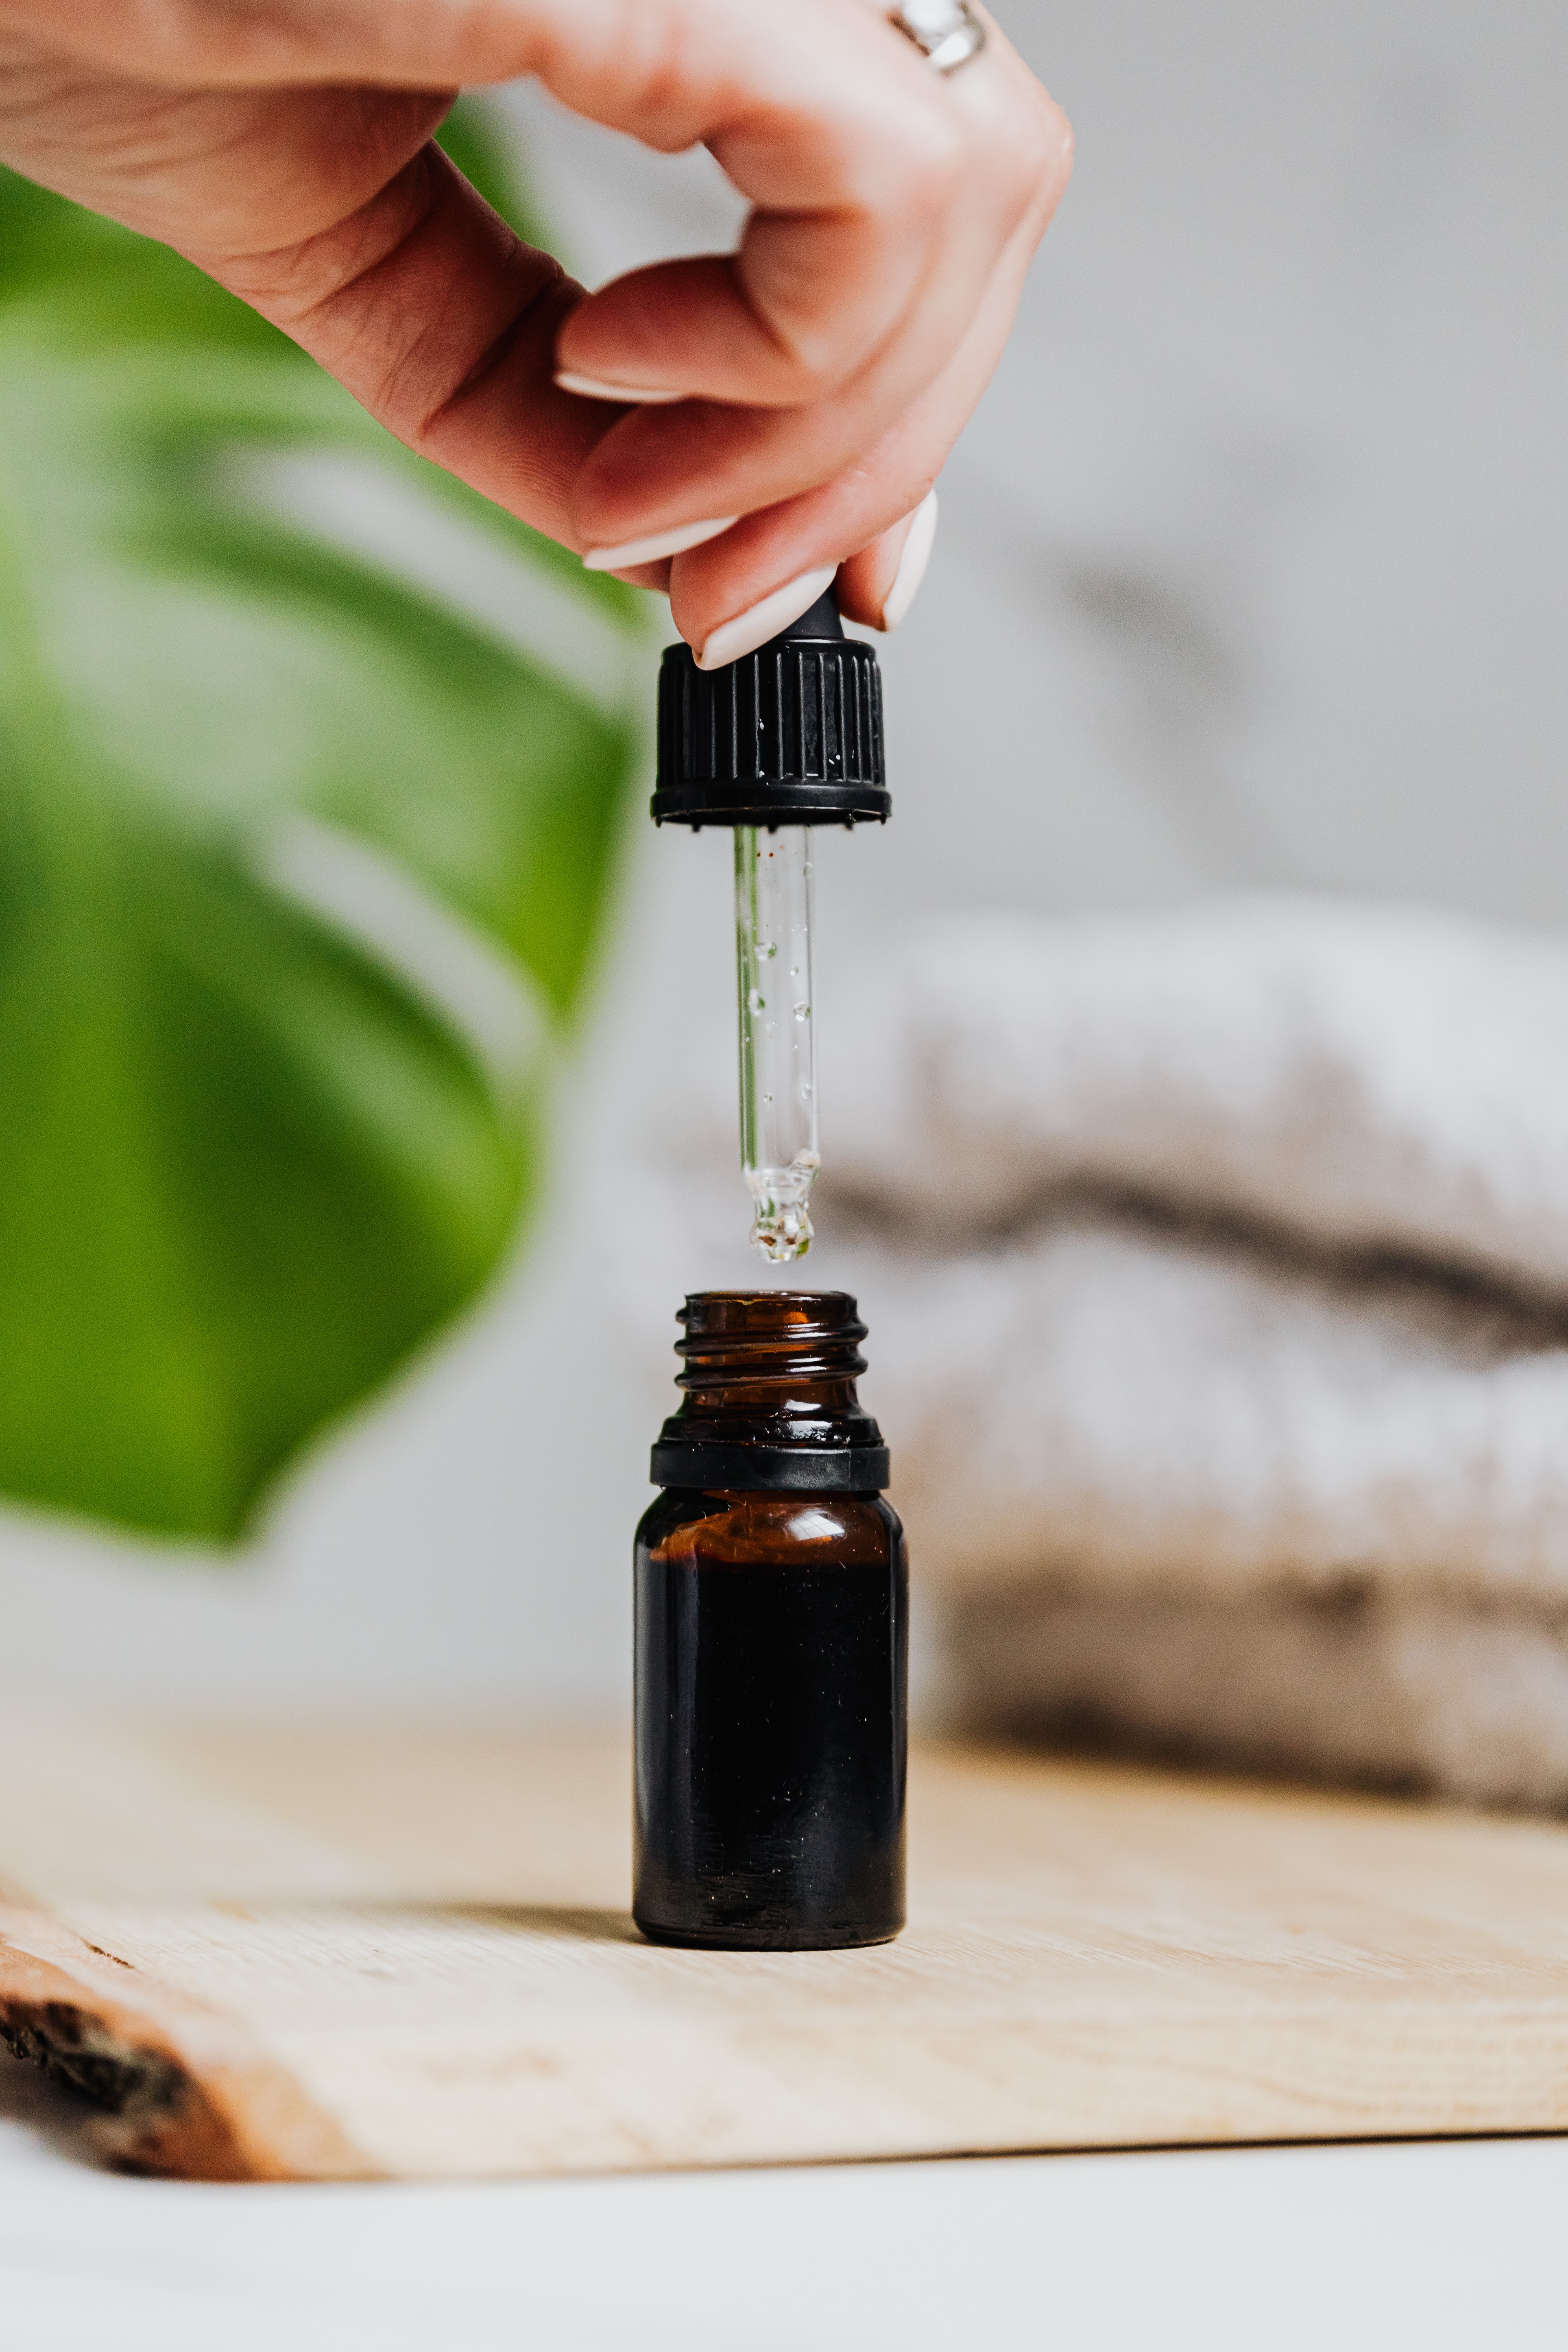 A bottle of oil featuring a woman's nails. | Source: Pexels